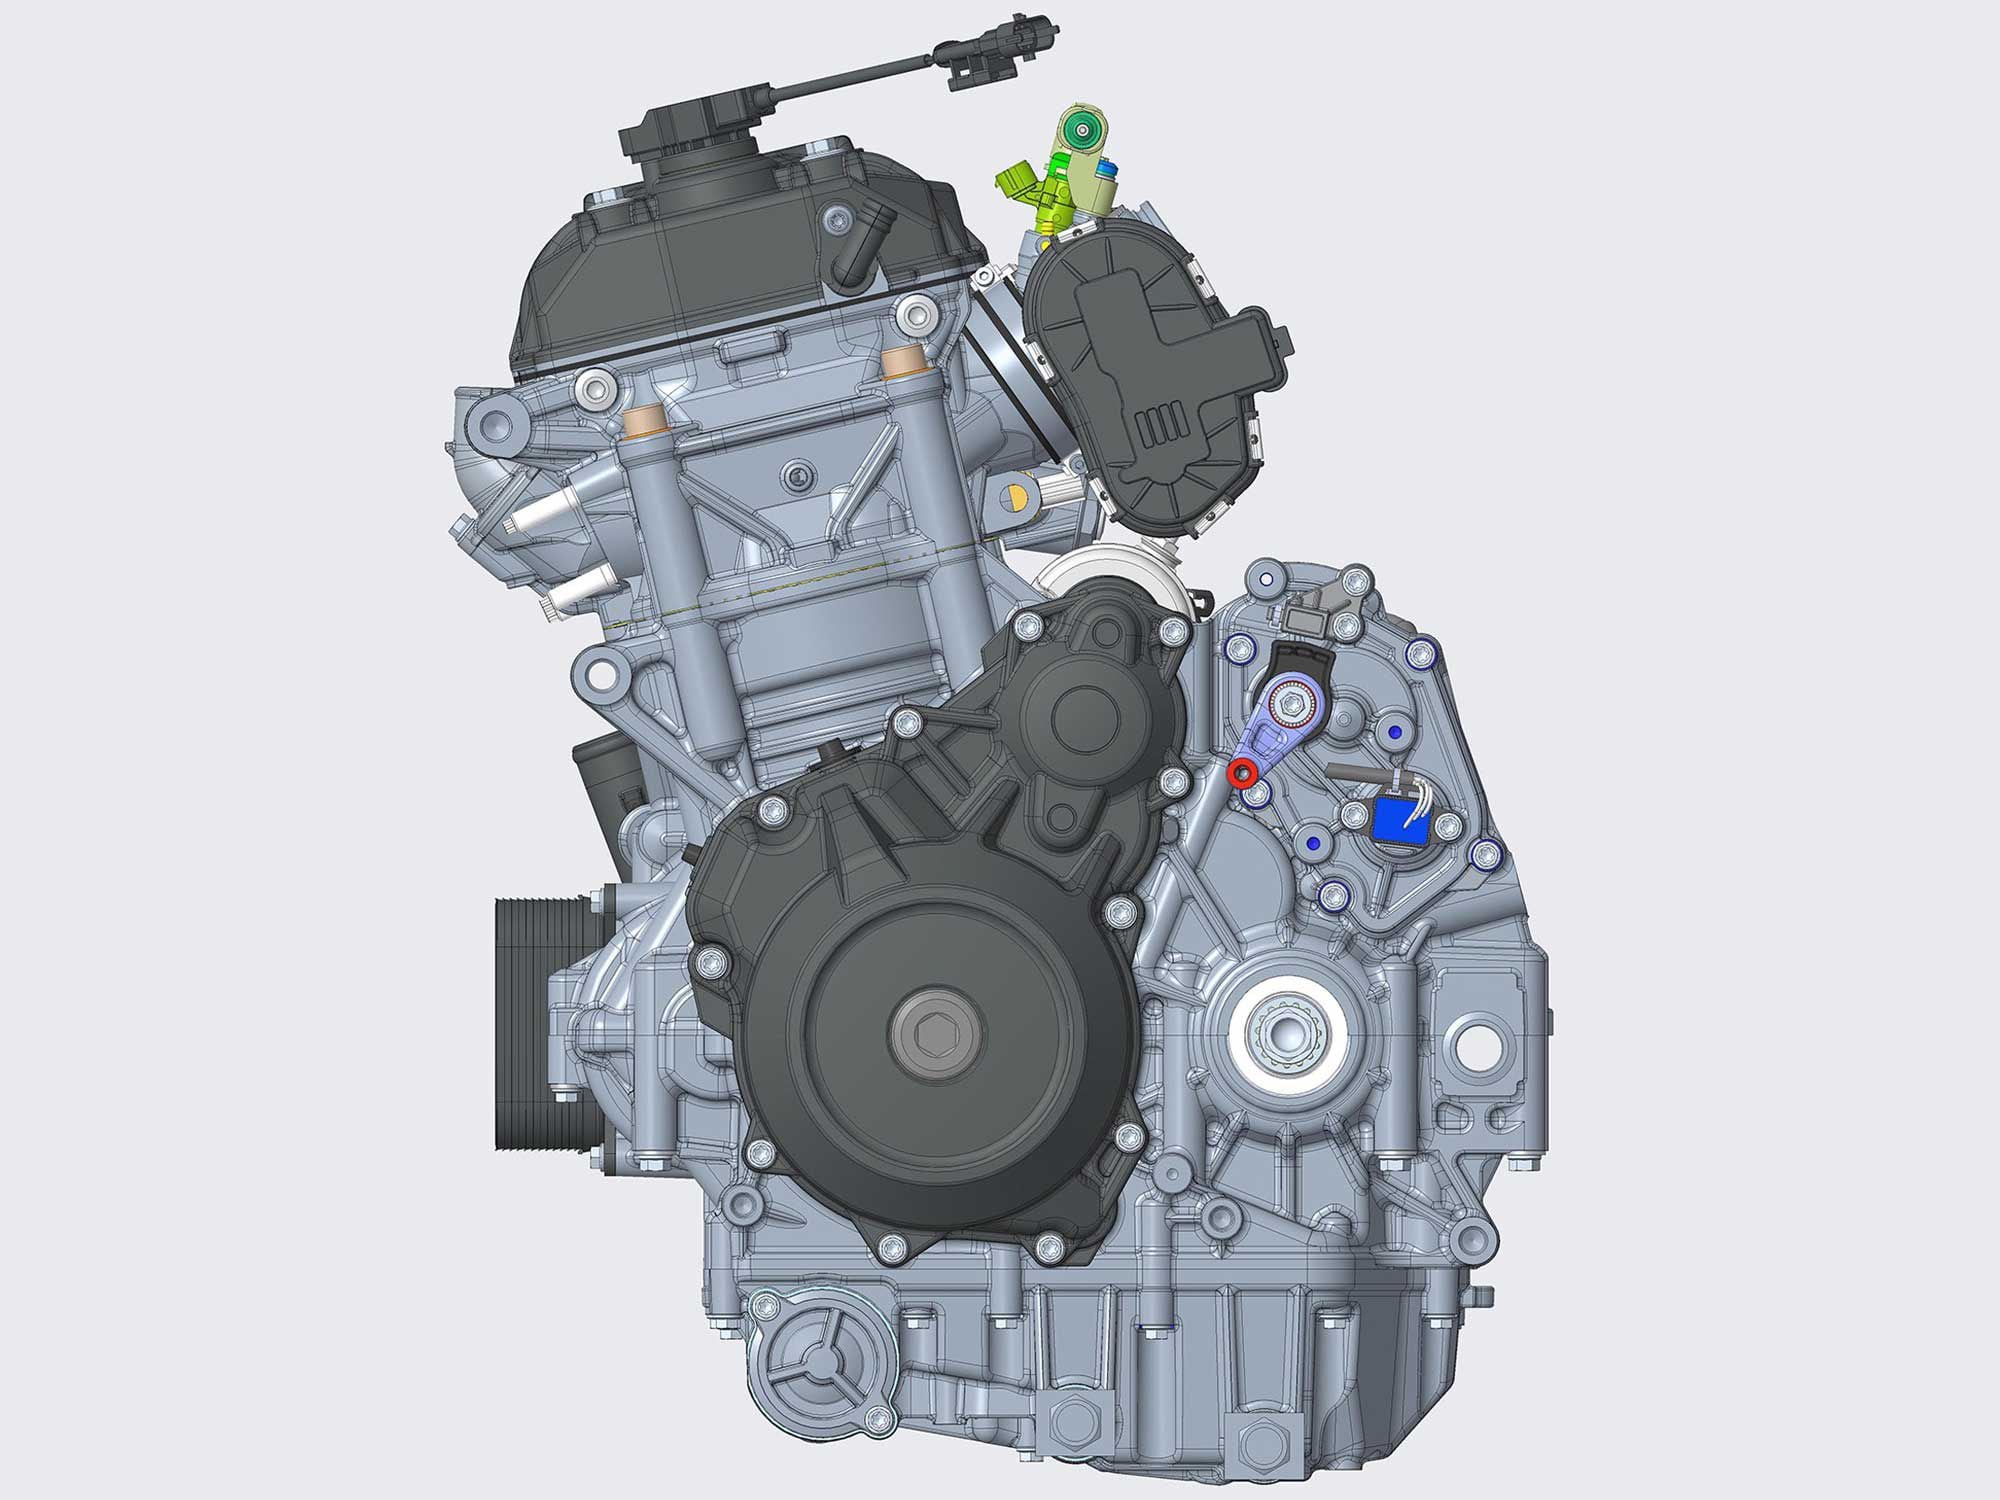 The engine will likely be manufactured in China by the CFMoto-KTM joint venture, and might later appear in CFMoto-branded bikes.